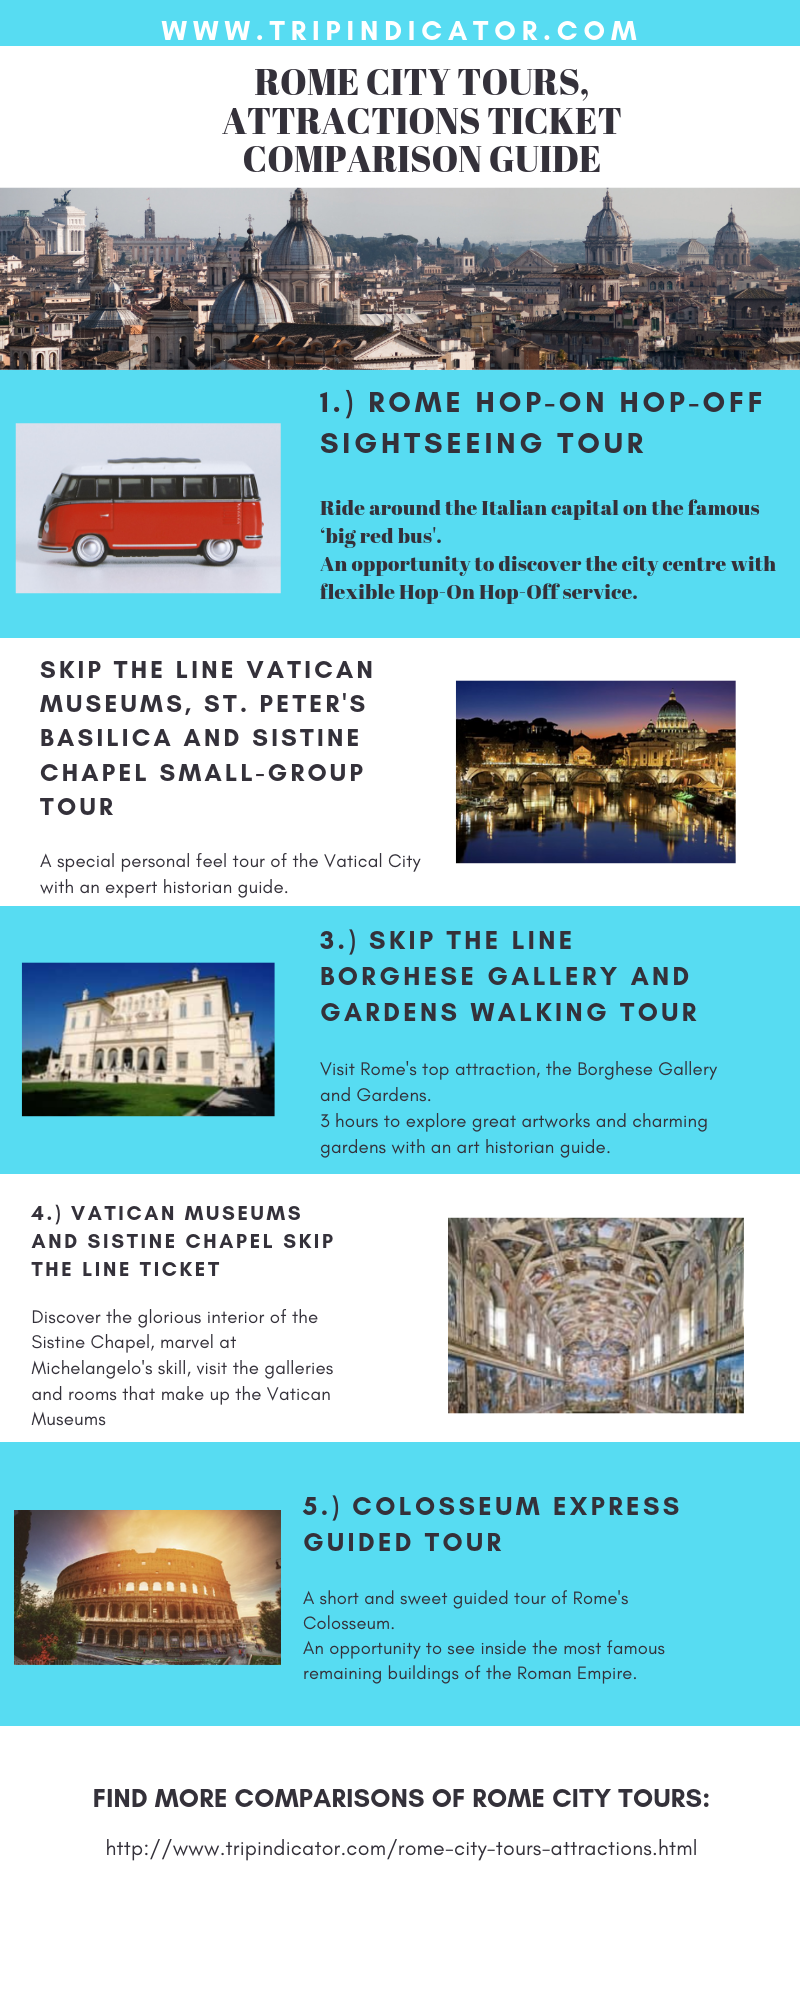 ROME CITY TOURS, ATTRACTIONS TICKET COMPARISONS.png Beautiful places in Rome and best touring option comparisons at- http://www.tripindicator.com/rome-city-tours-attractions.html by YLN